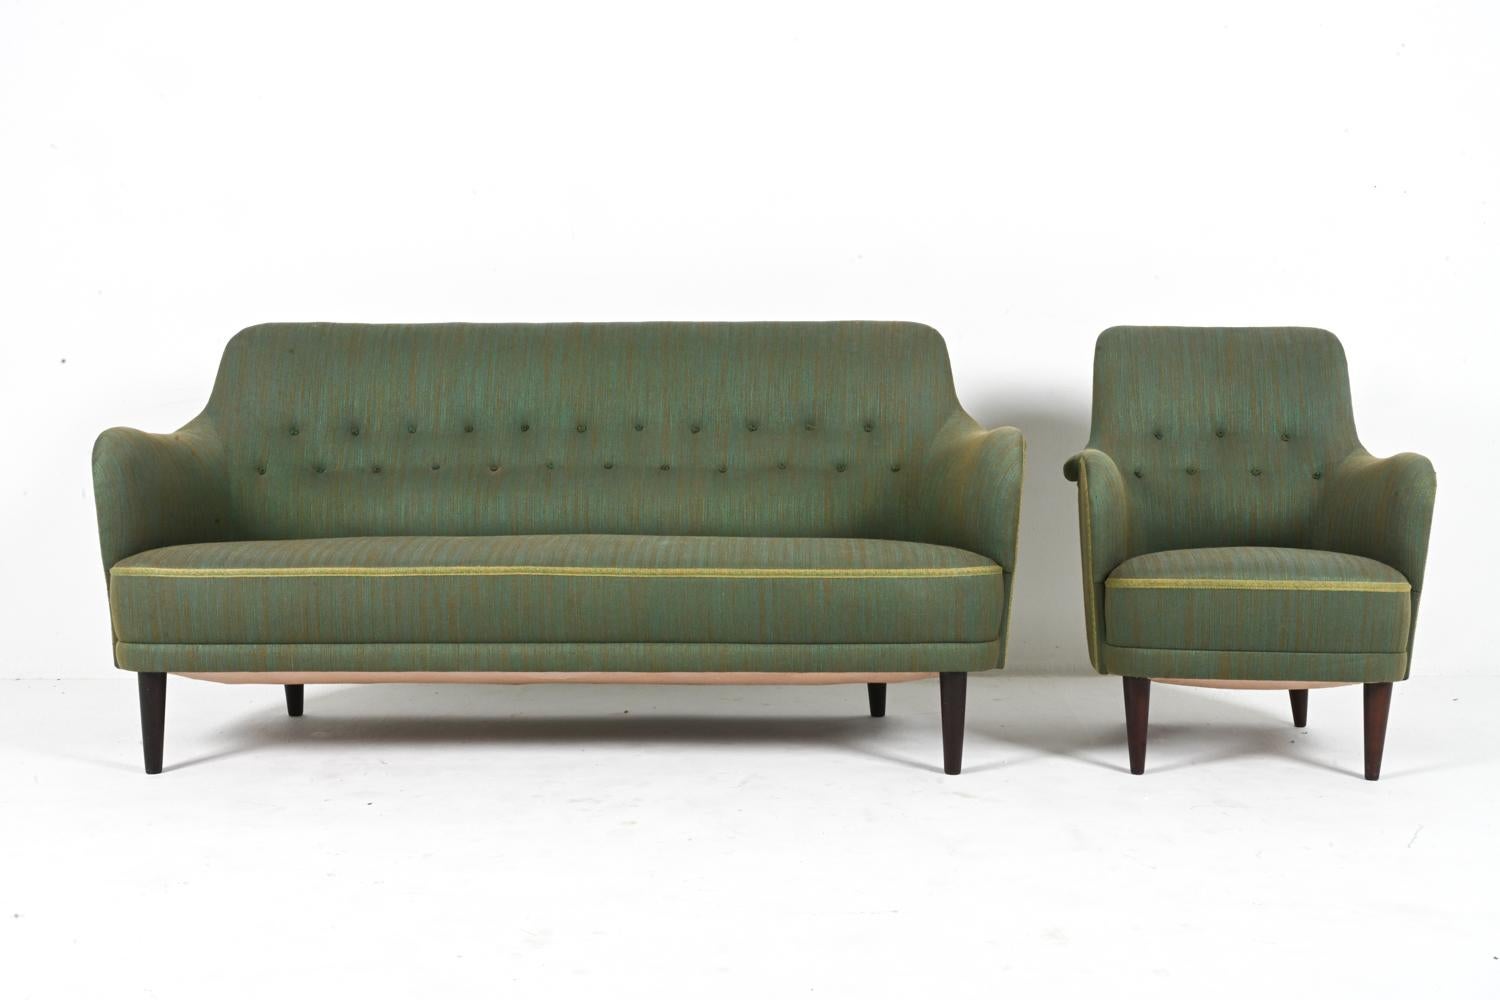 Swedish Mid-Century Sofa & Armchair Suite by Carl Malmsten in Beech & Twill In Good Condition For Sale In Norwalk, CT